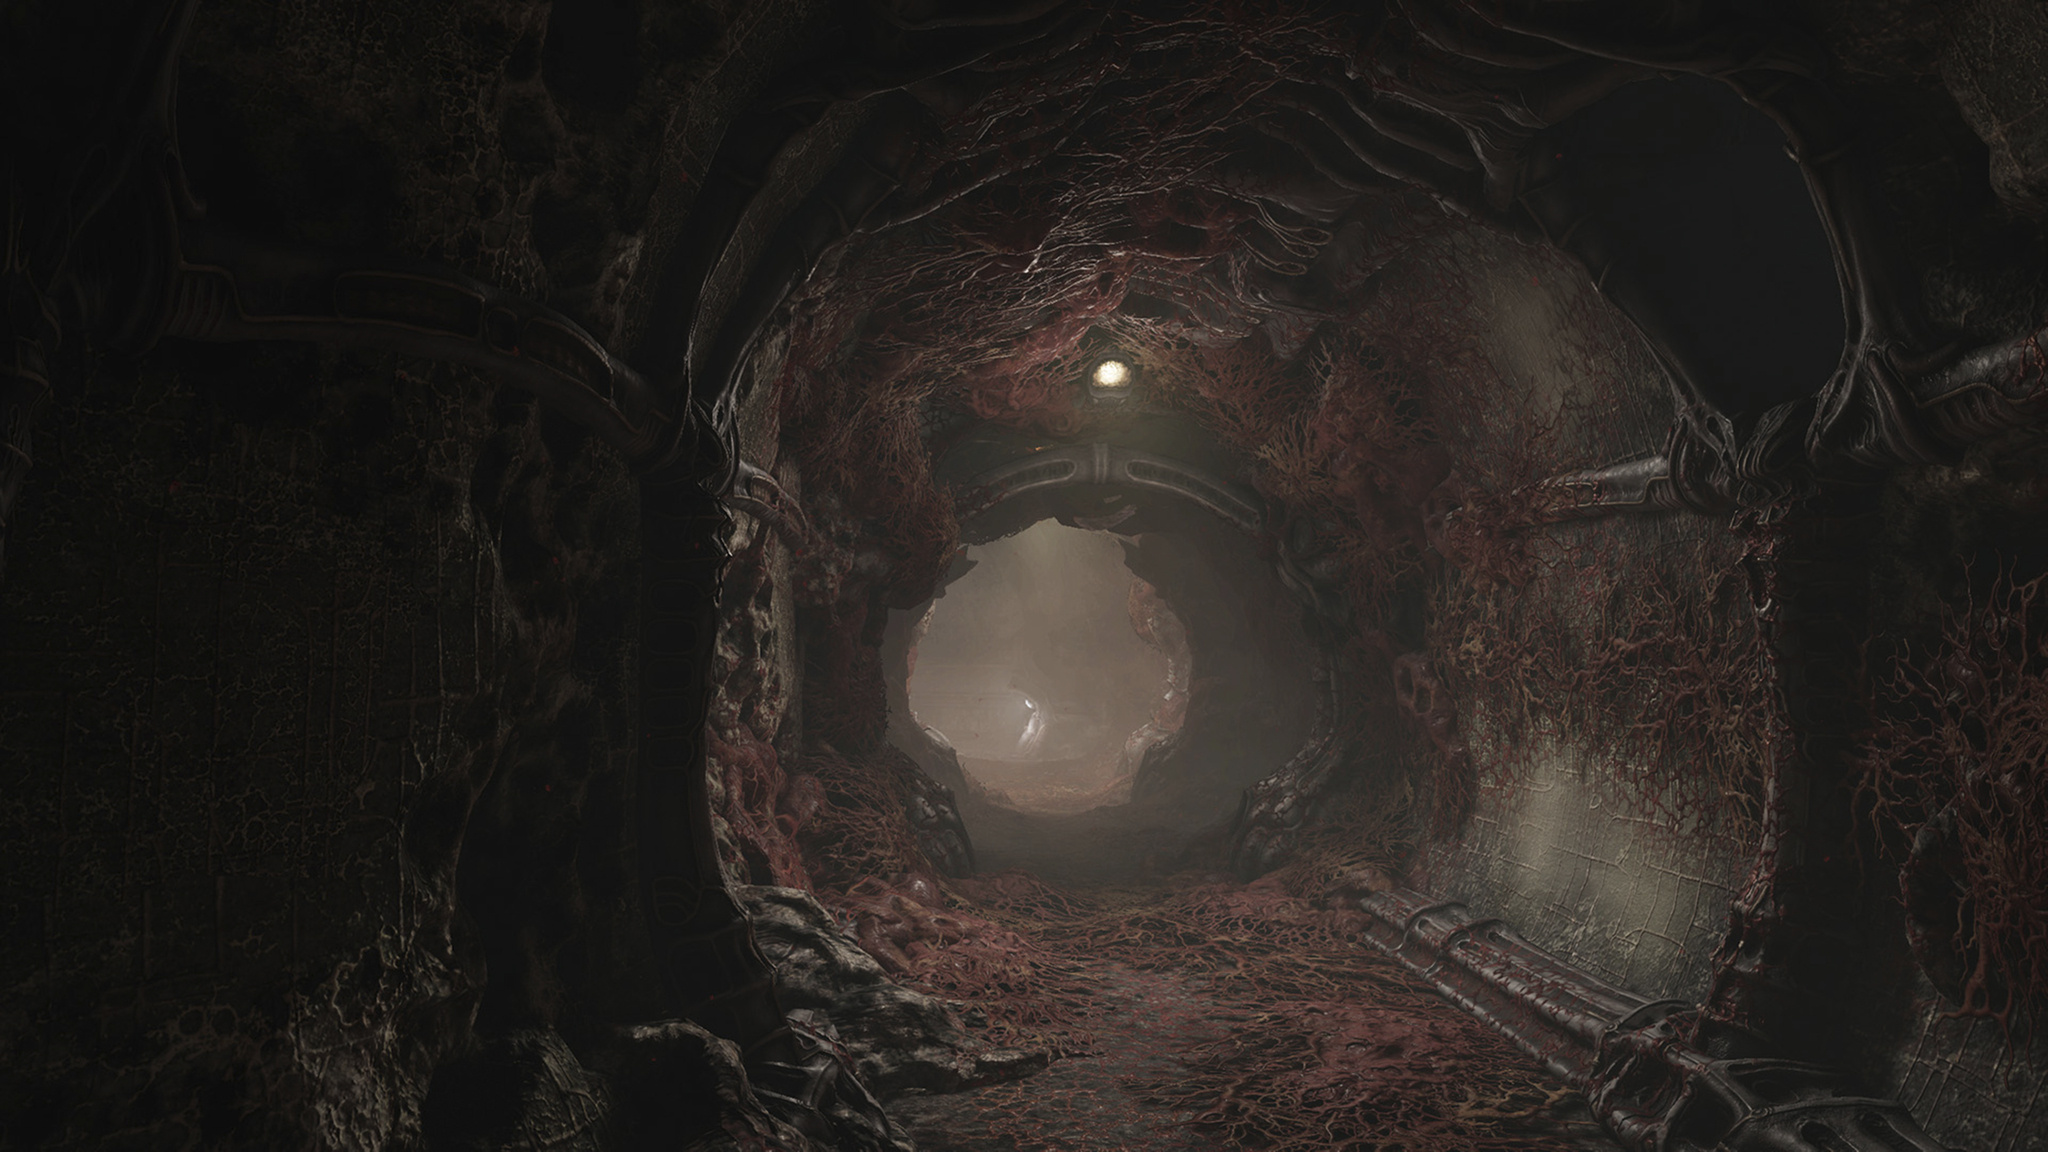 Scorn (Game): The player fighting a monstrous creature in tunnels, Oppressive corridors. 2050x1160 HD Wallpaper.